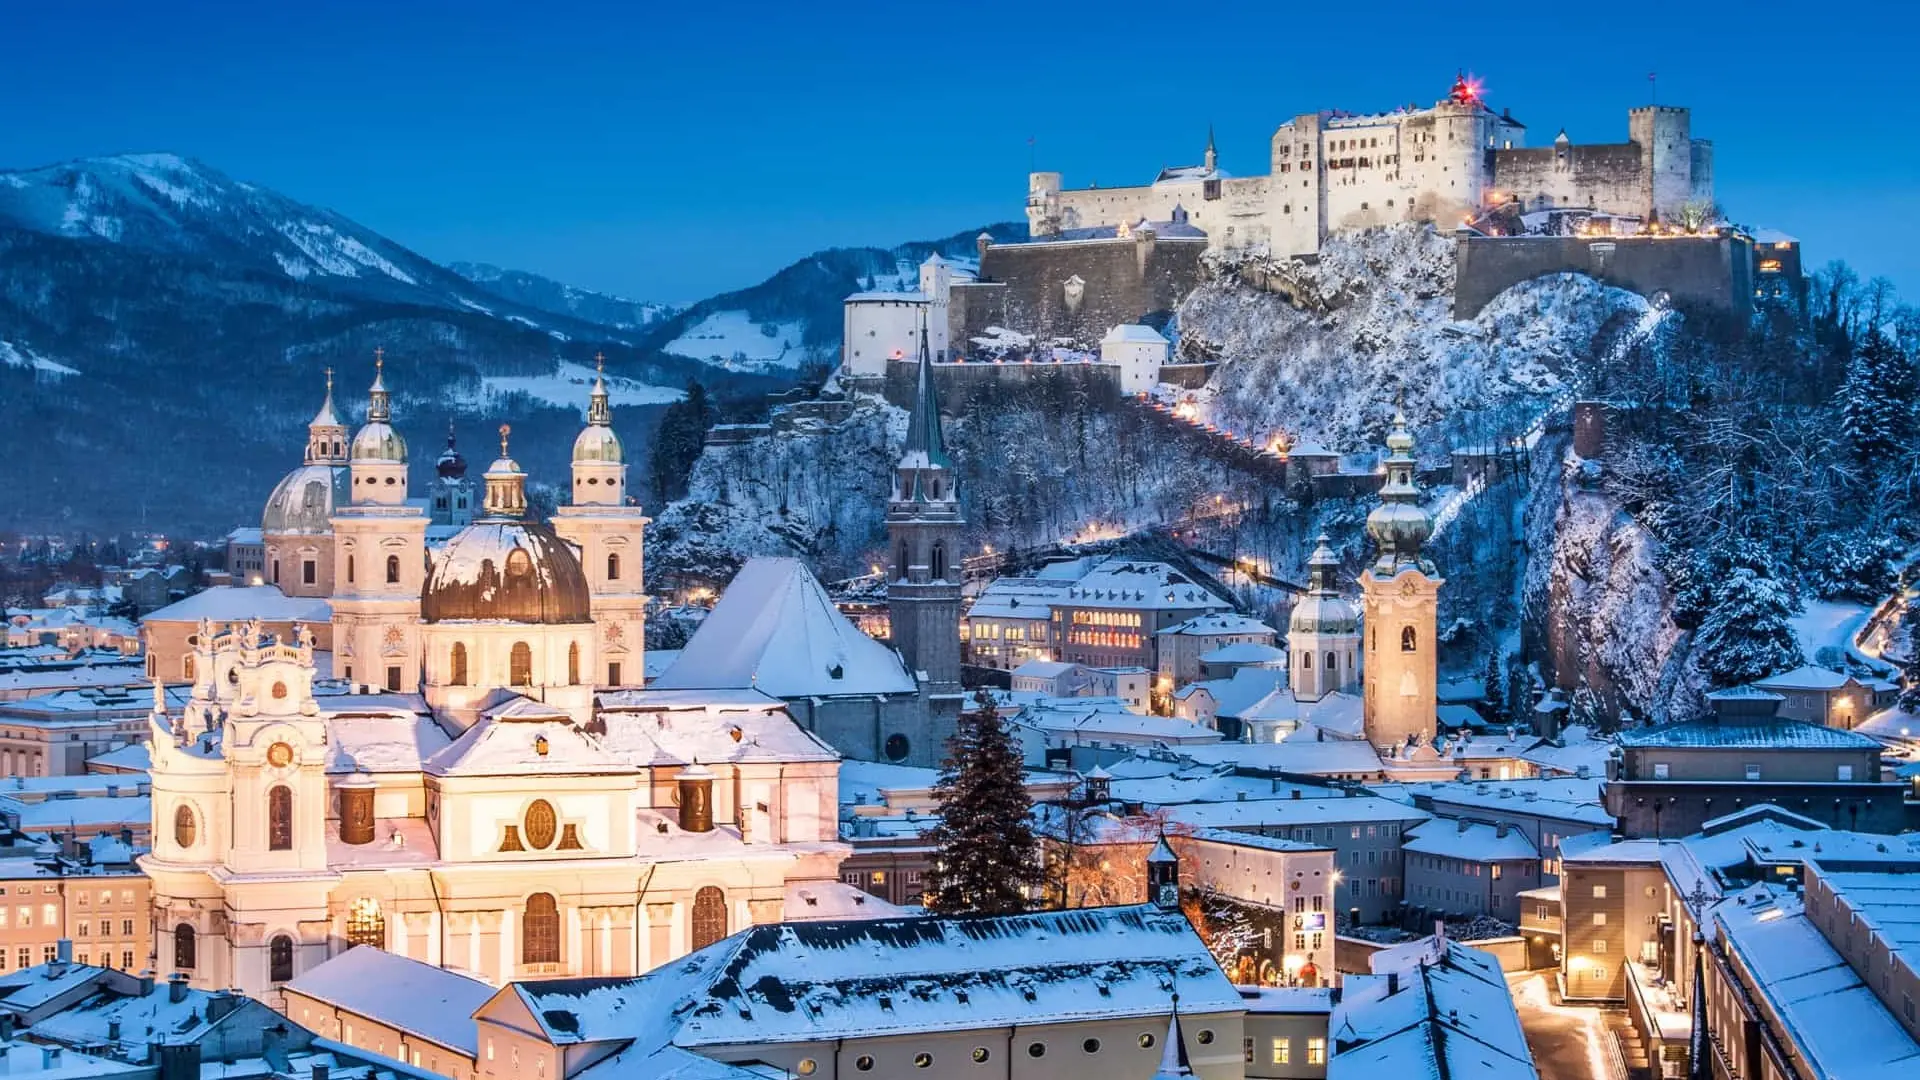 An overlook of the city of Salzburg in snow